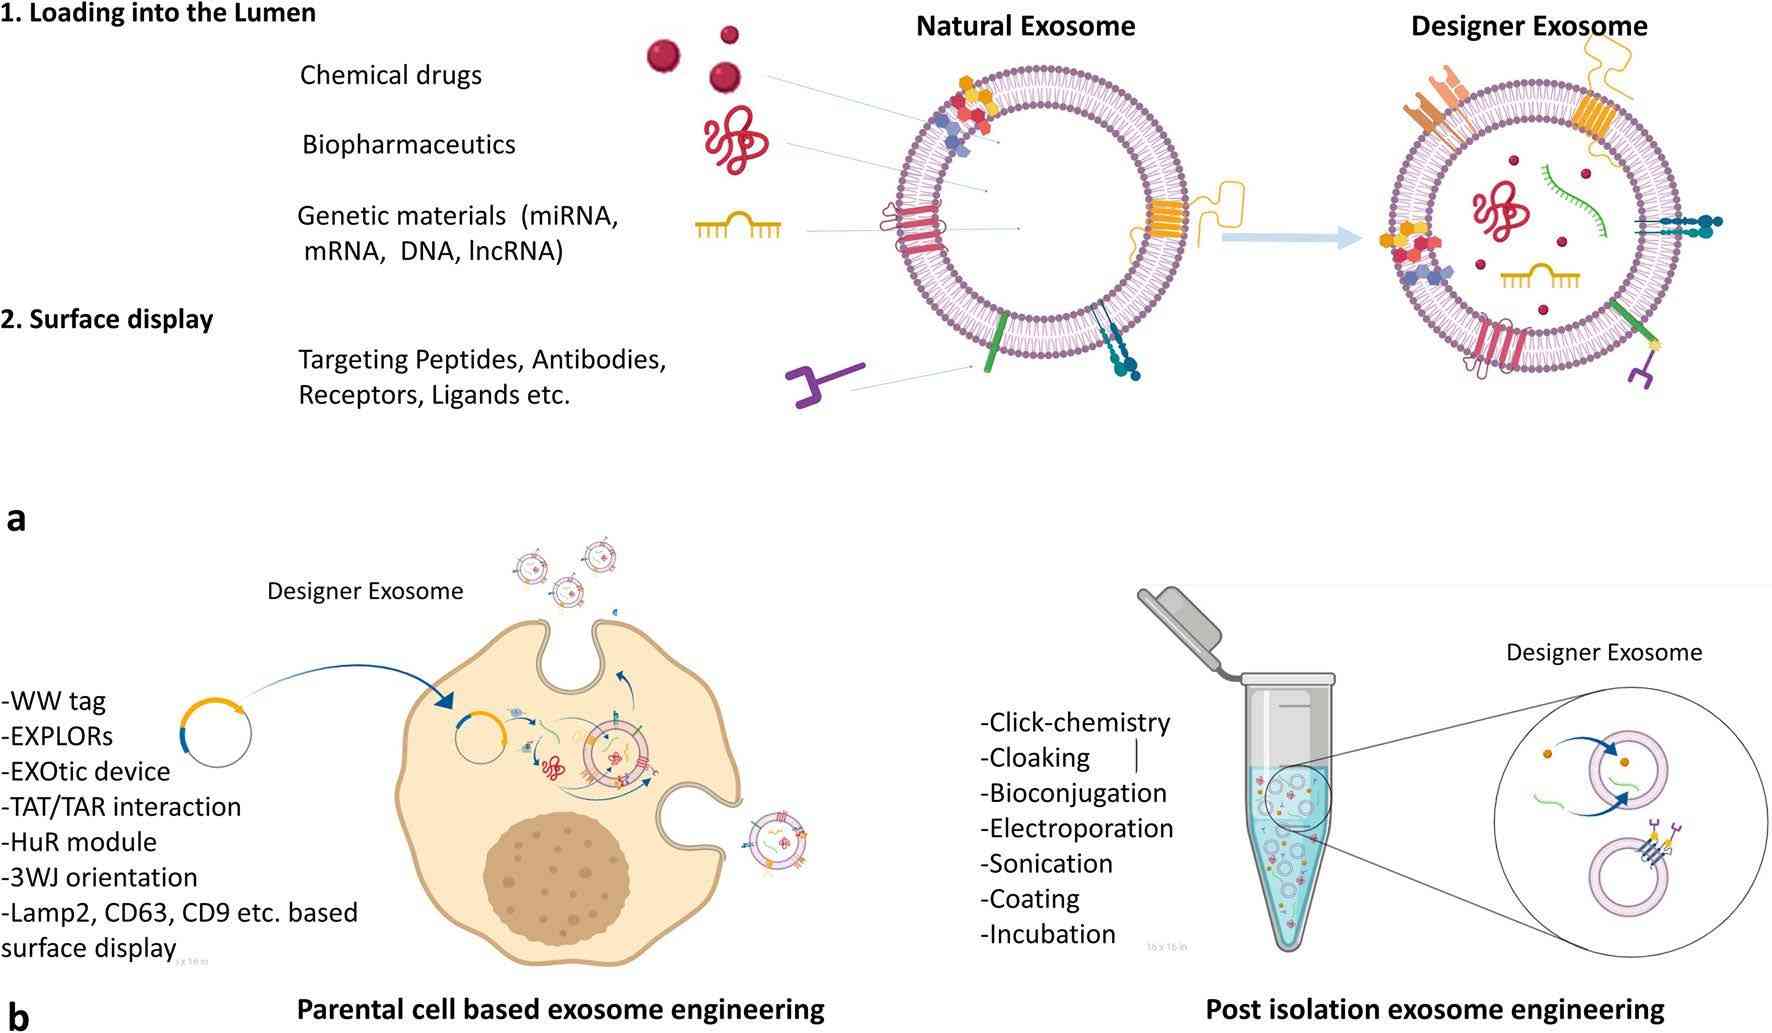 Exosome engineering approaches.